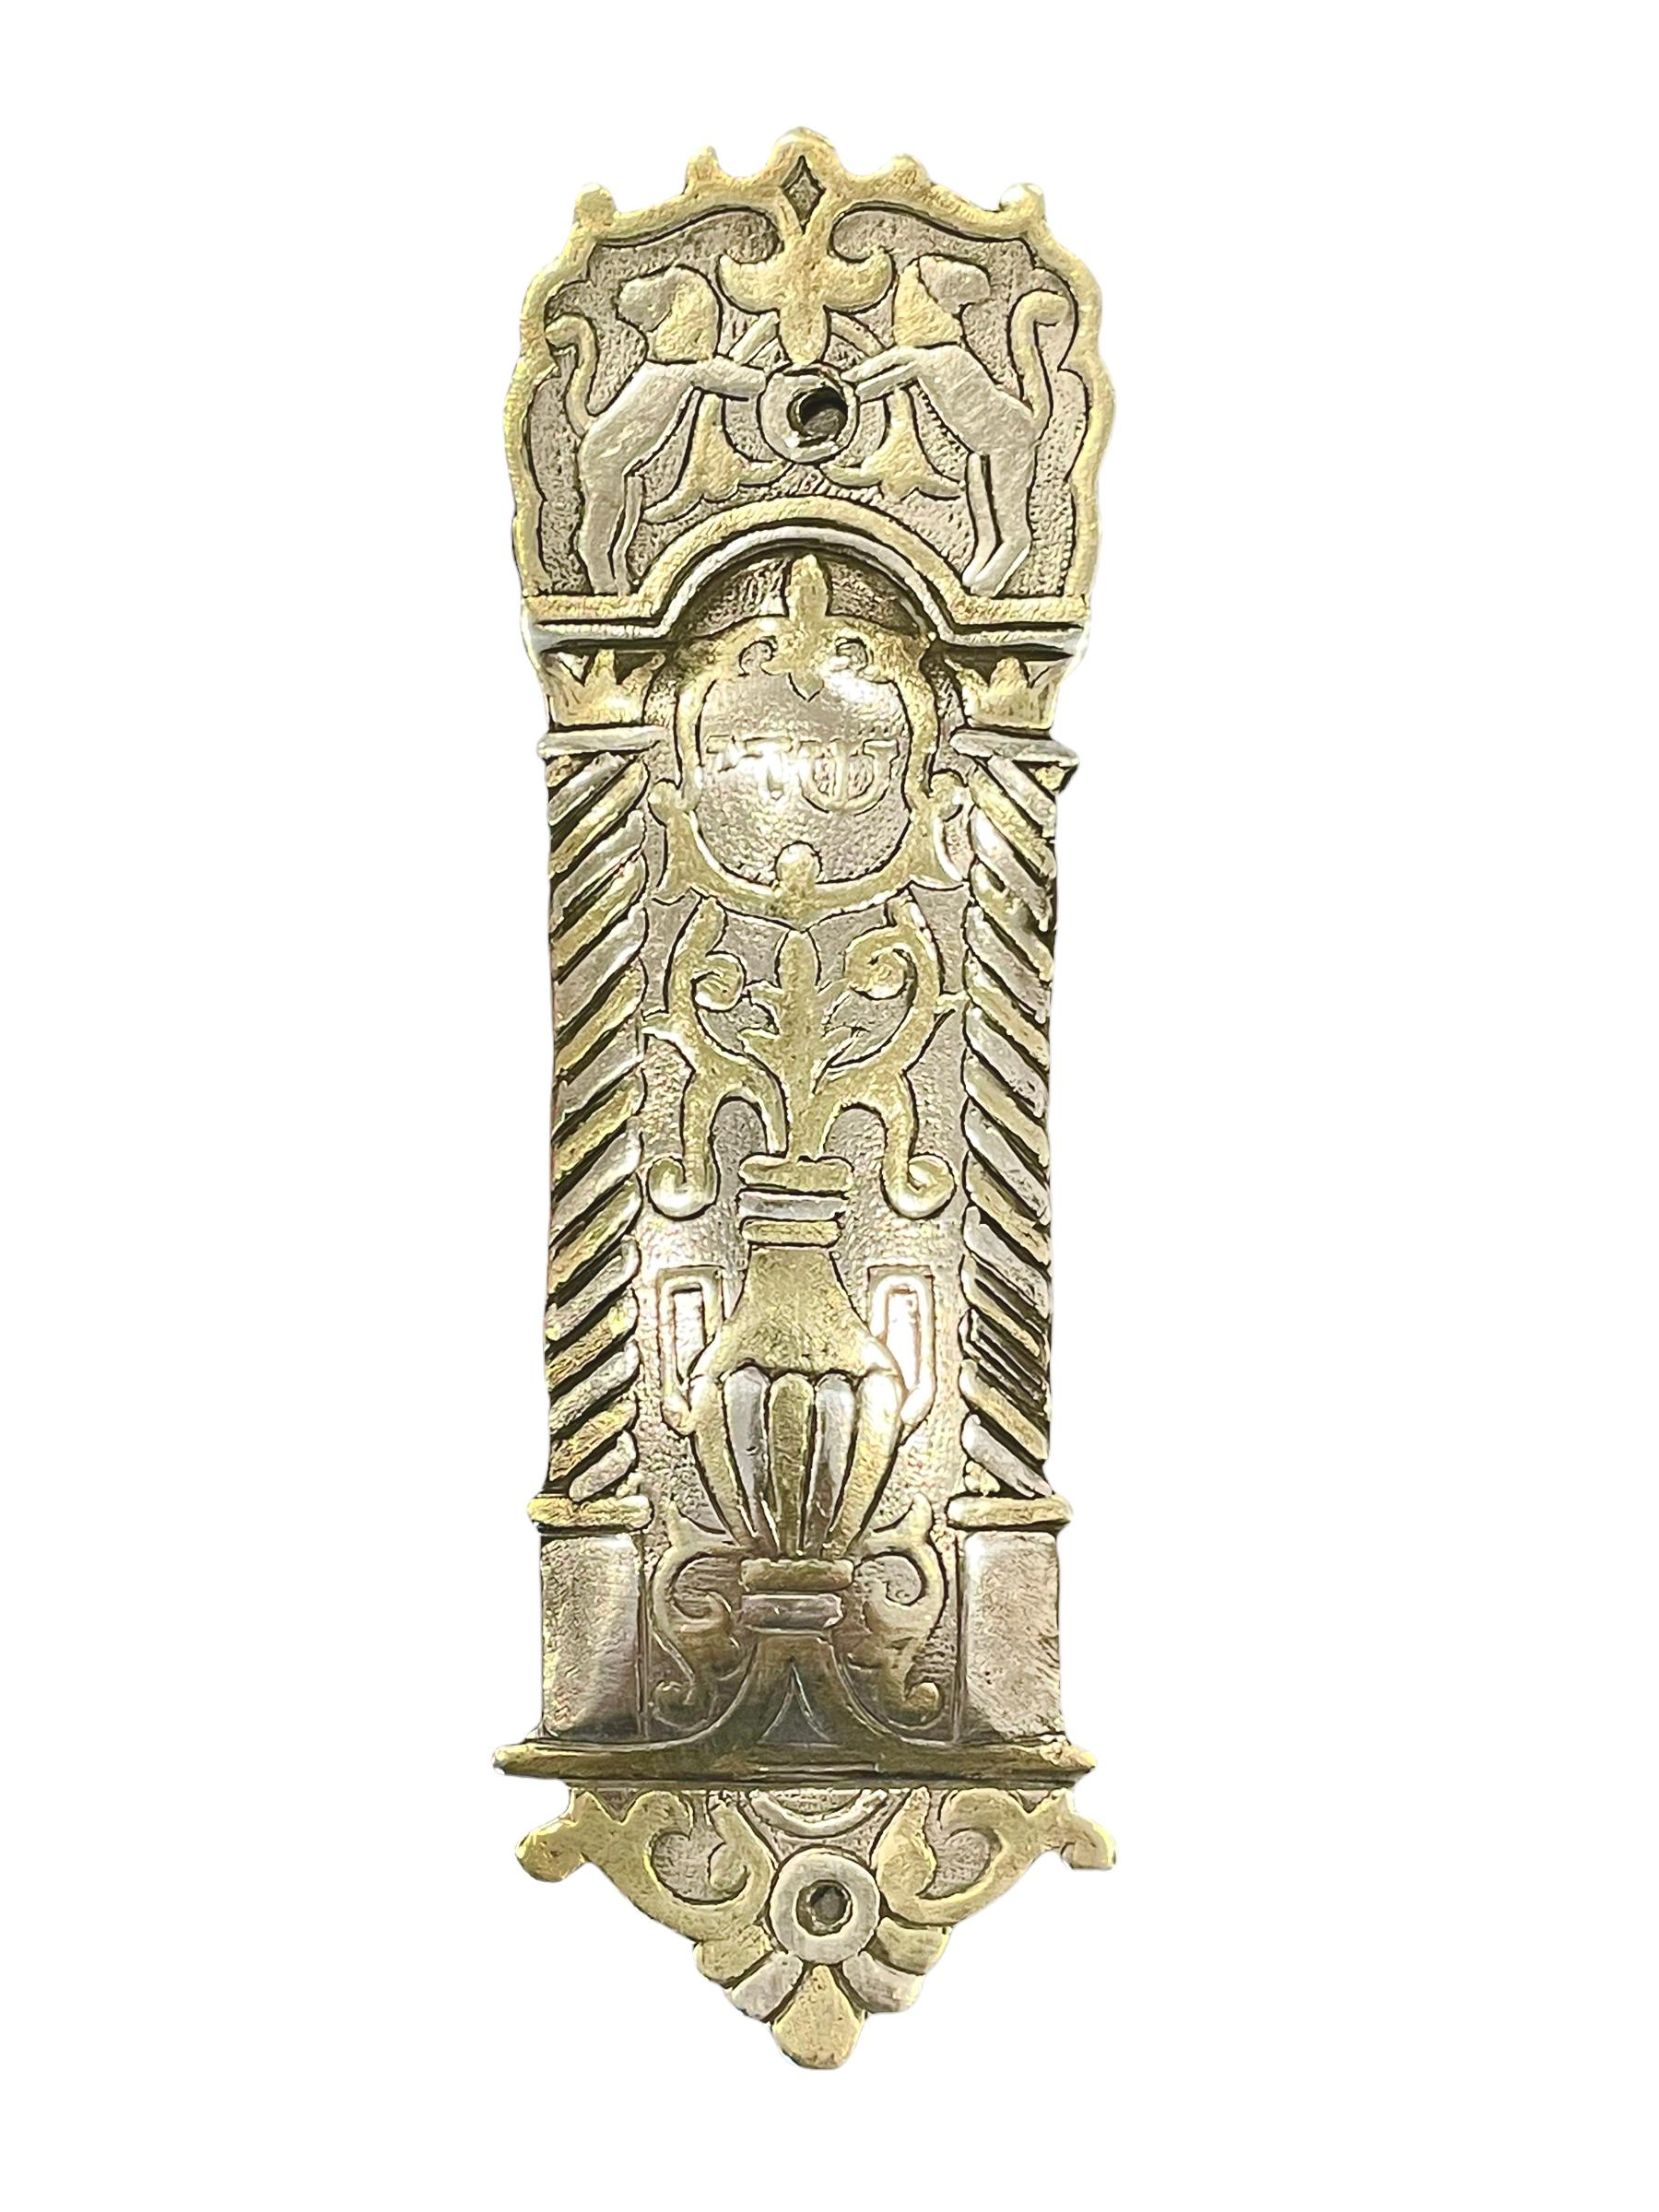 Handmade silver and gold mezuzah case. Made in a Damascened technique, the case is inlaid with silver and gold, to create a beautiful, primitively crafted piece. At the top, a pair of lions surrounded by floral motives come together, holding the